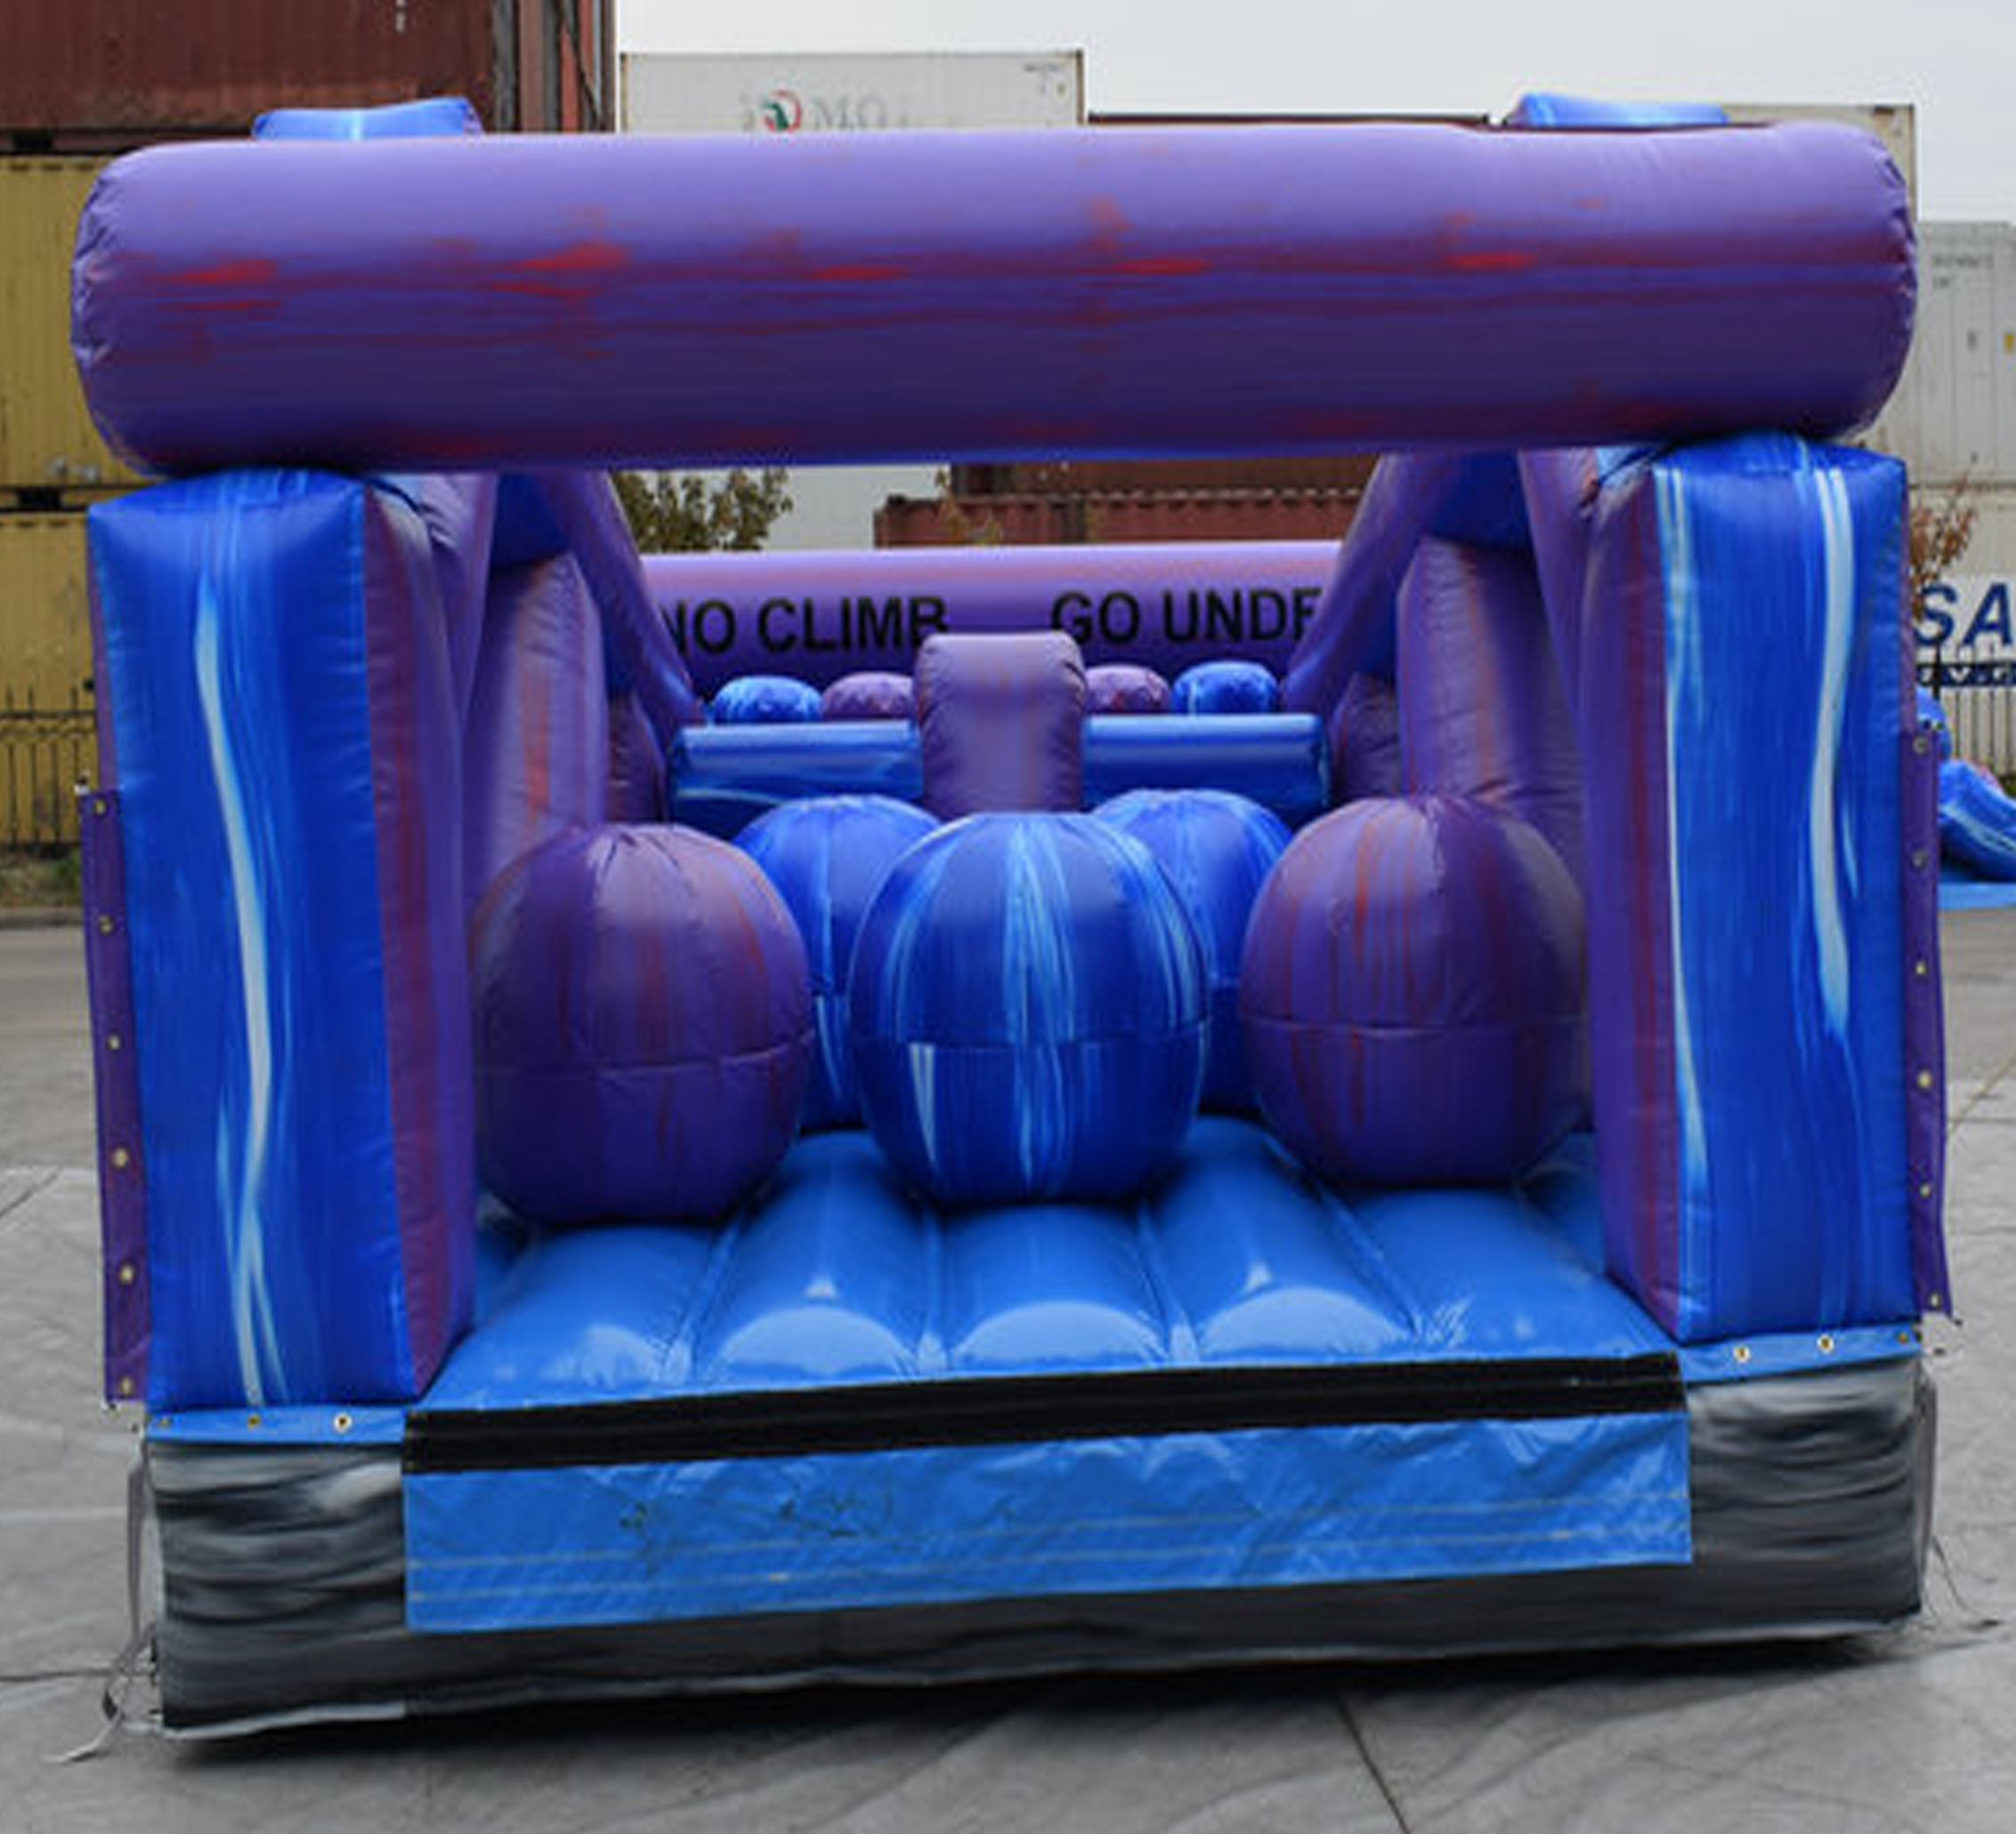 obstacle course Rentals Cleveland TN